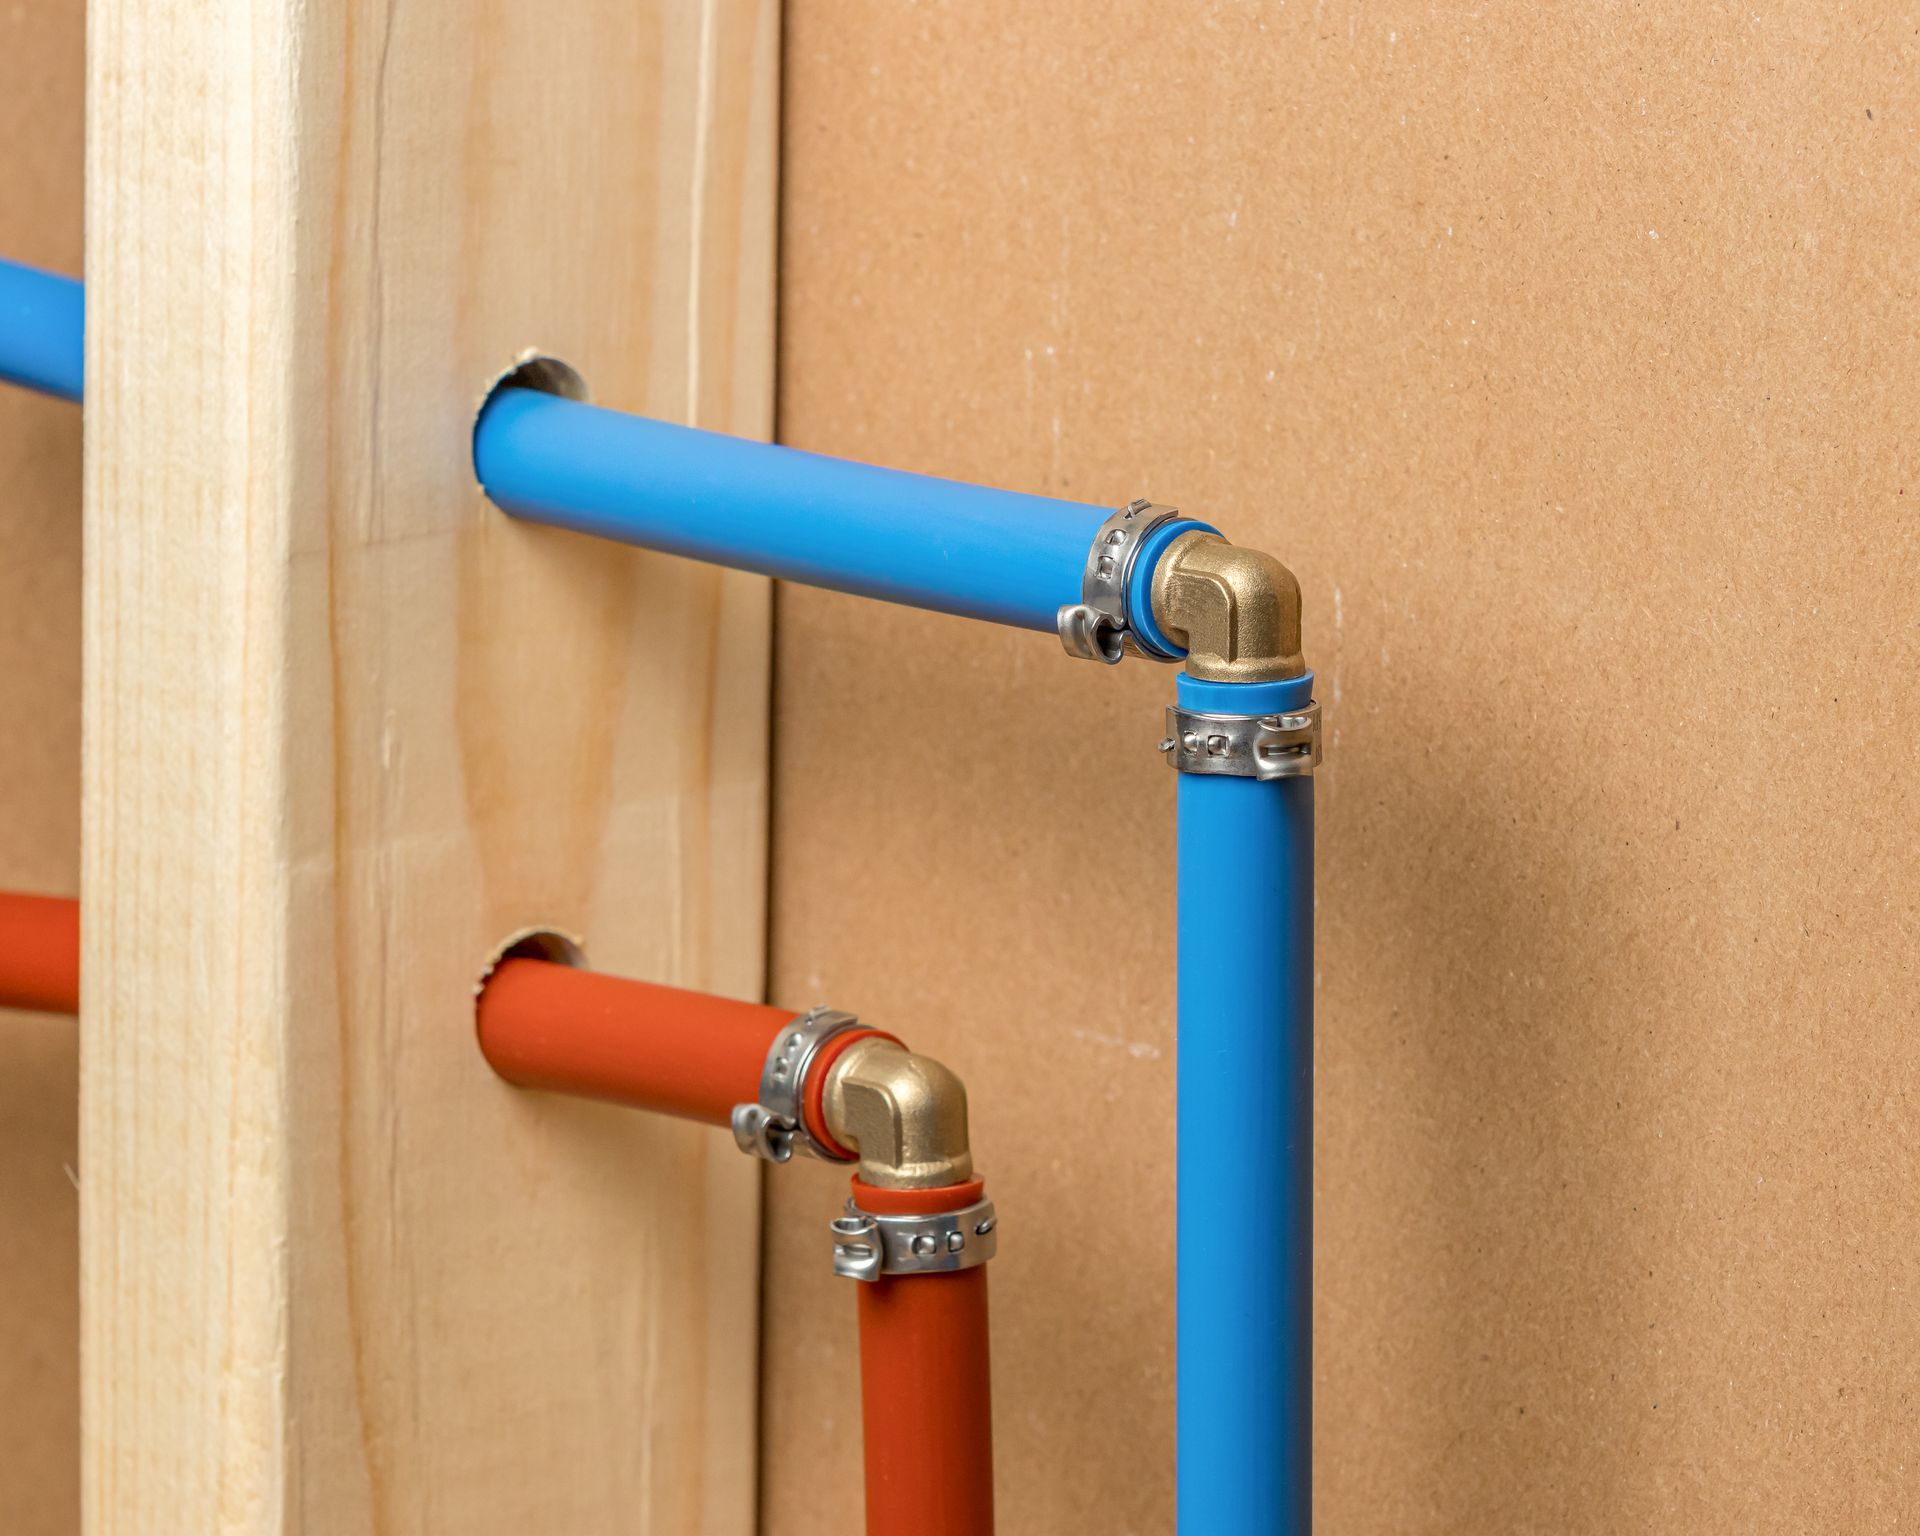 blue and orange pipes are connected to a wooden wall